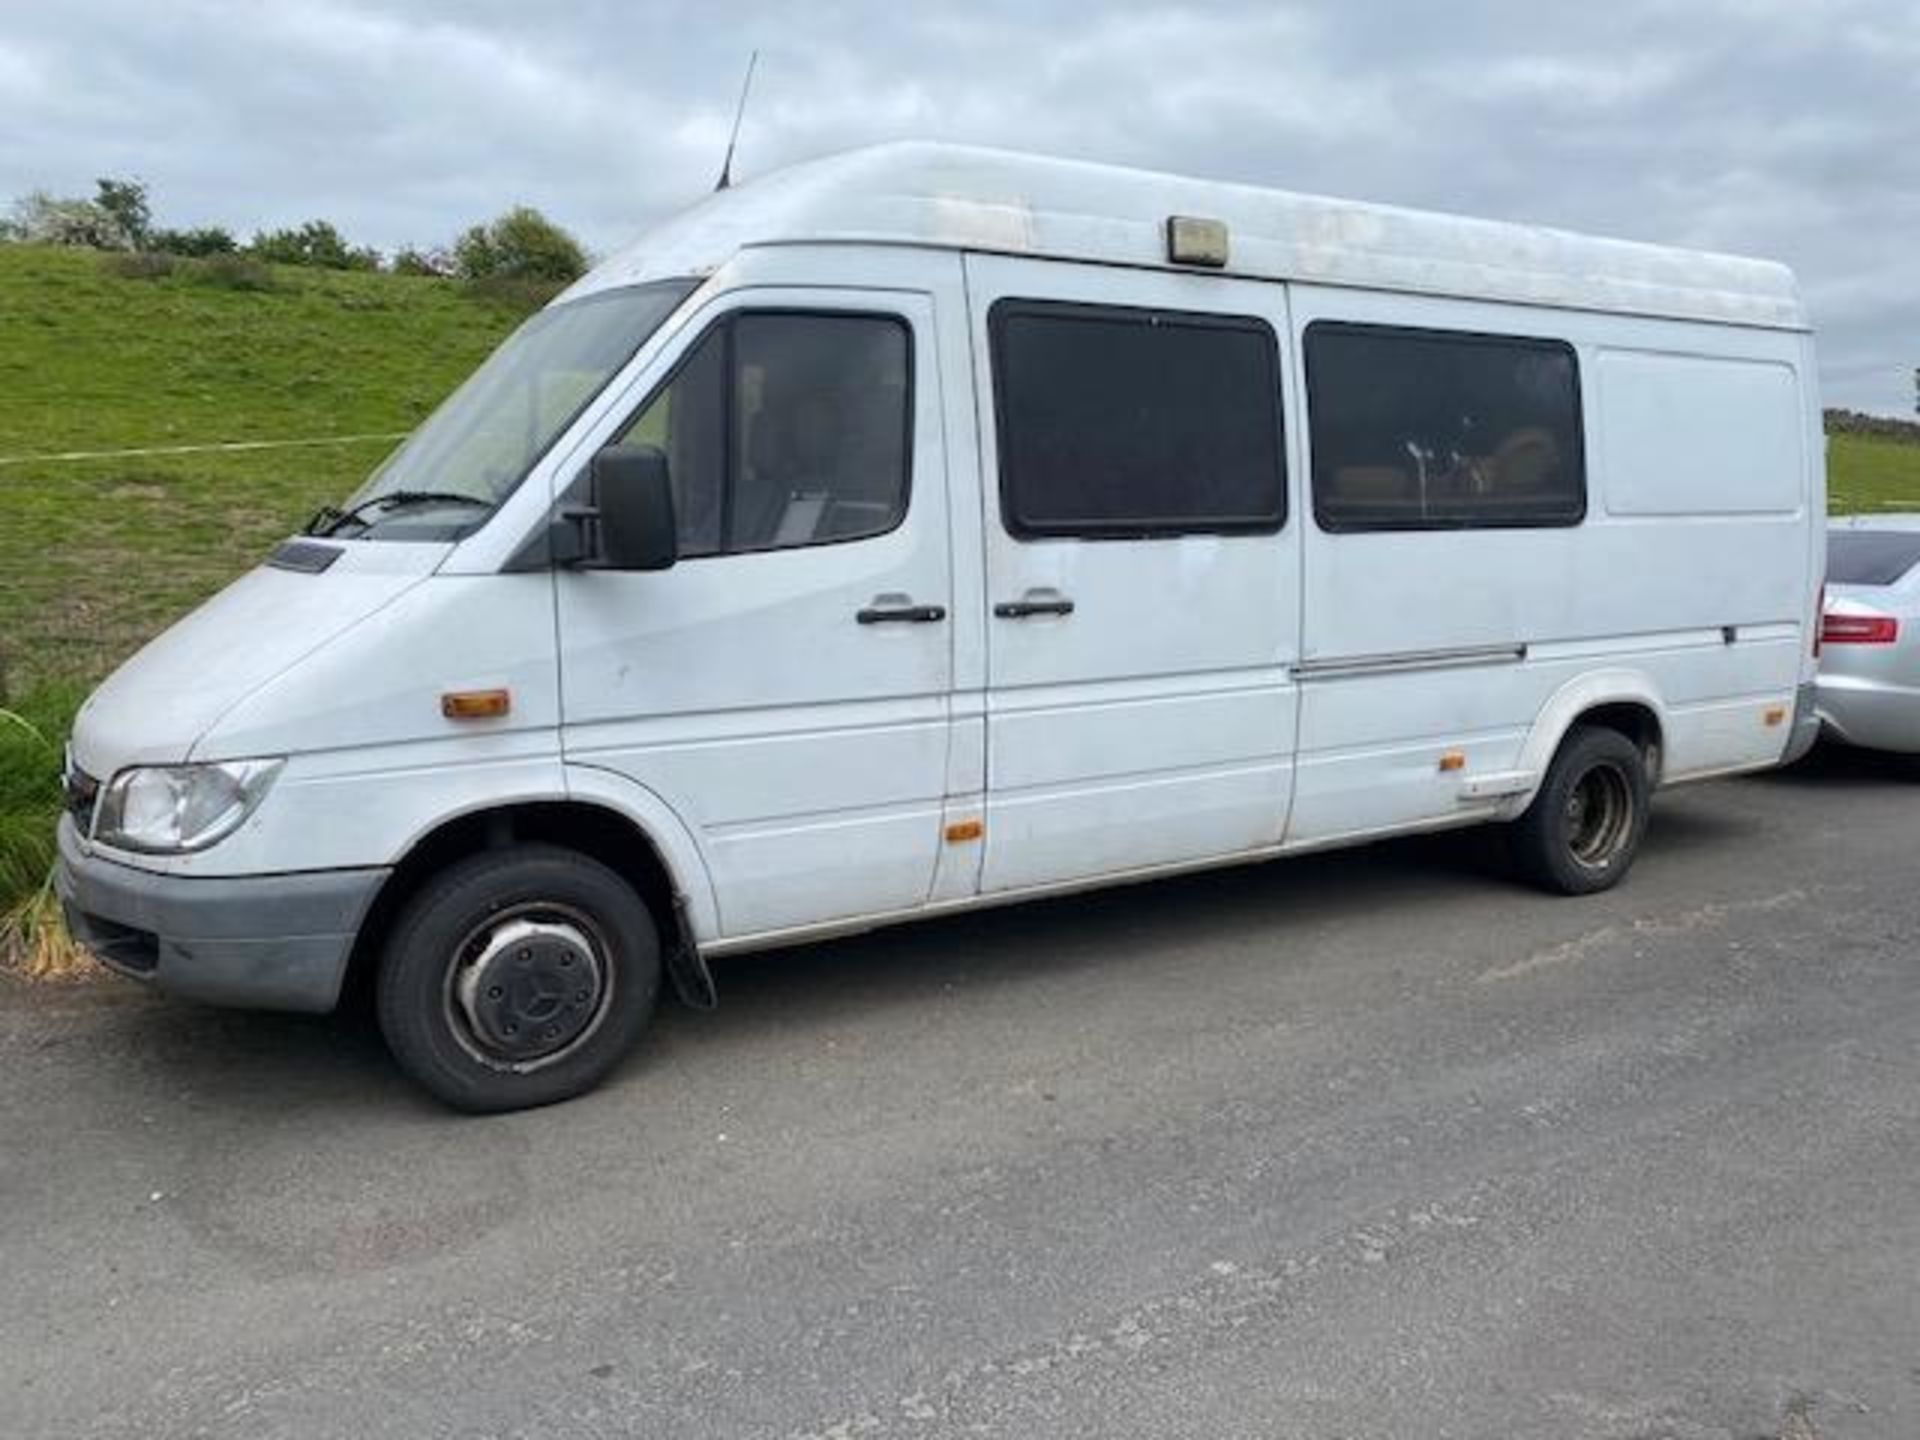 Mercedes 3cdi 2.1 Camper Van , 5ft Kingsize Bed , Seating Area which converts to another double